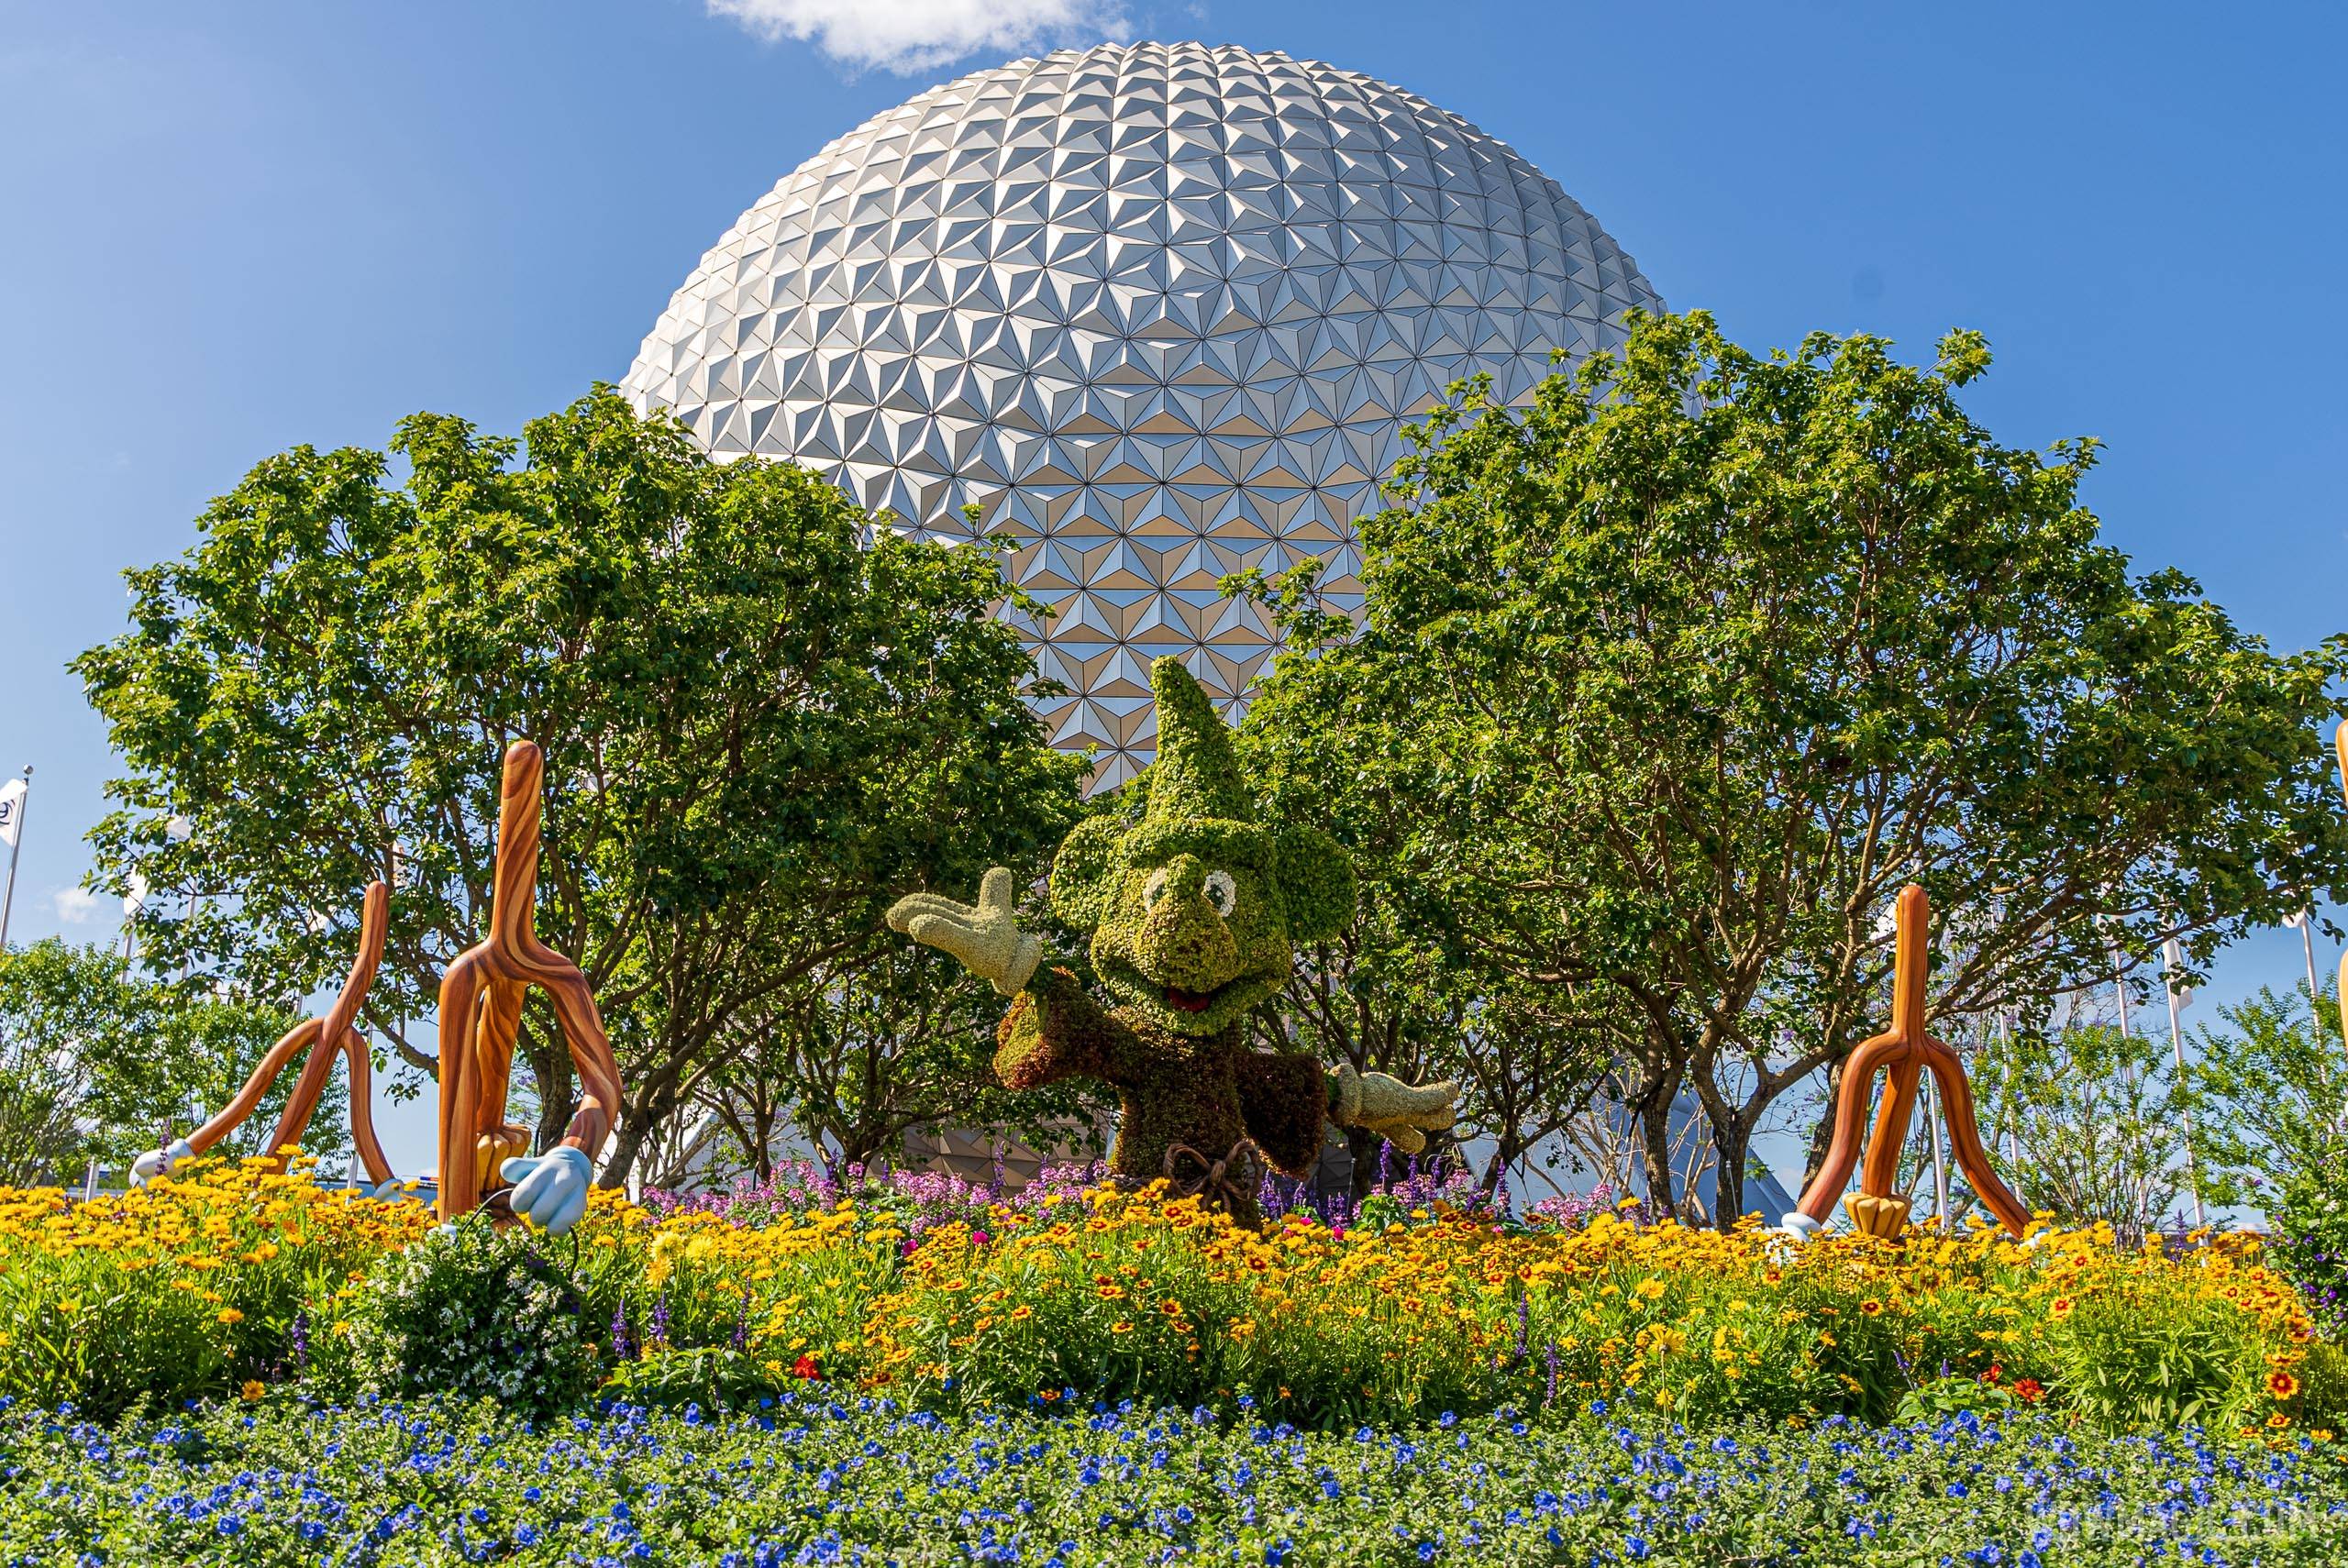 Spaceship Earth point of lights installation - April 28 2021